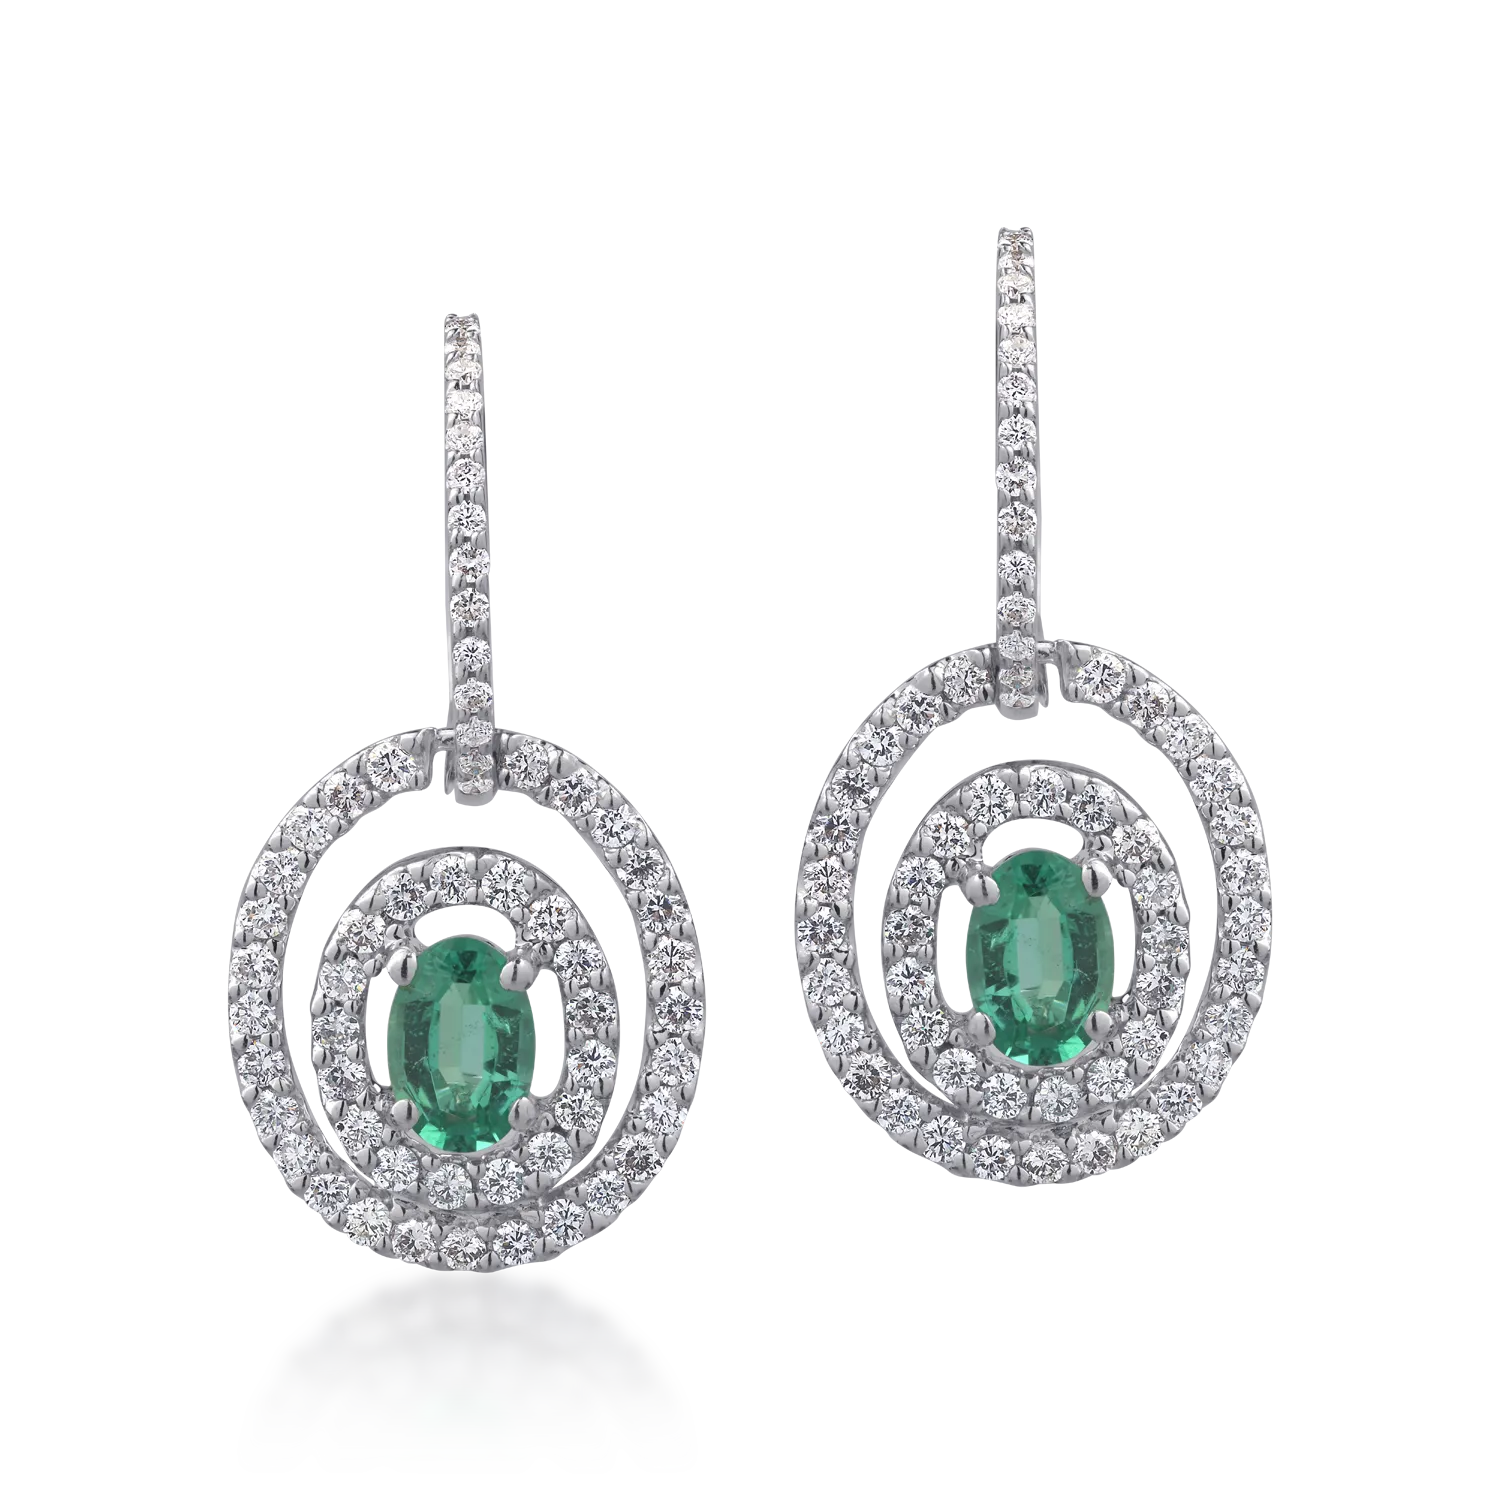 18K white gold earrings with 0.84ct emeralds and 1.04ct diamonds